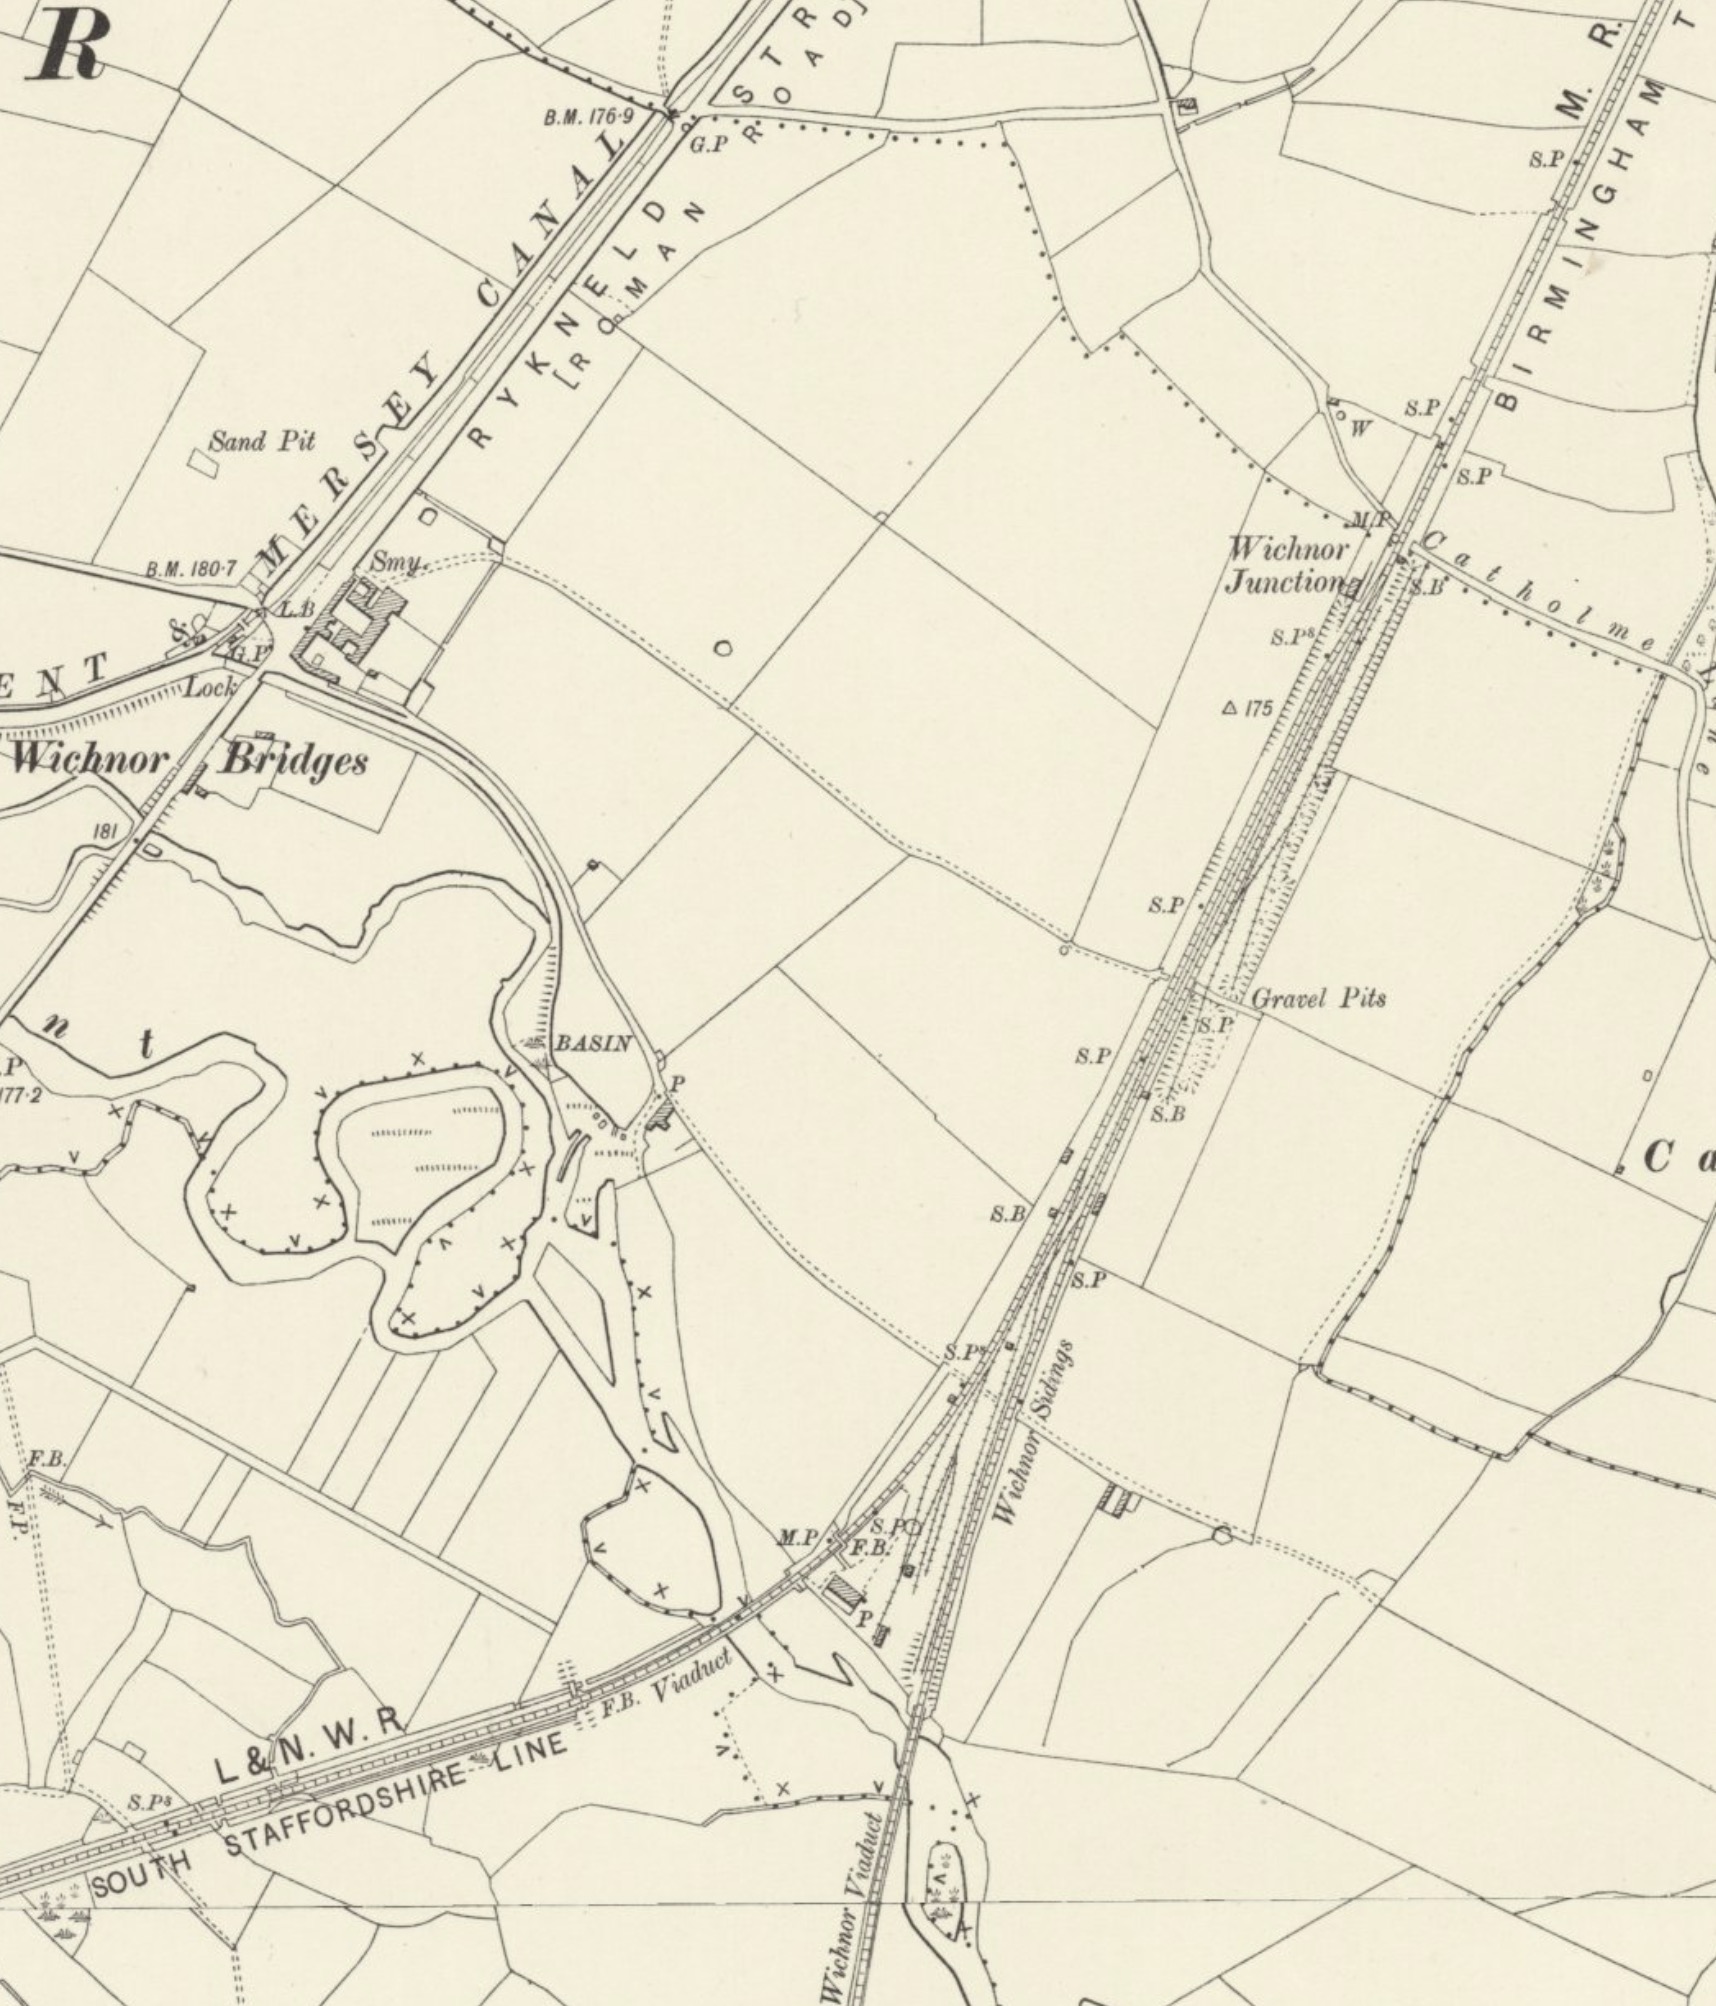 OS Map of the Wichnor area